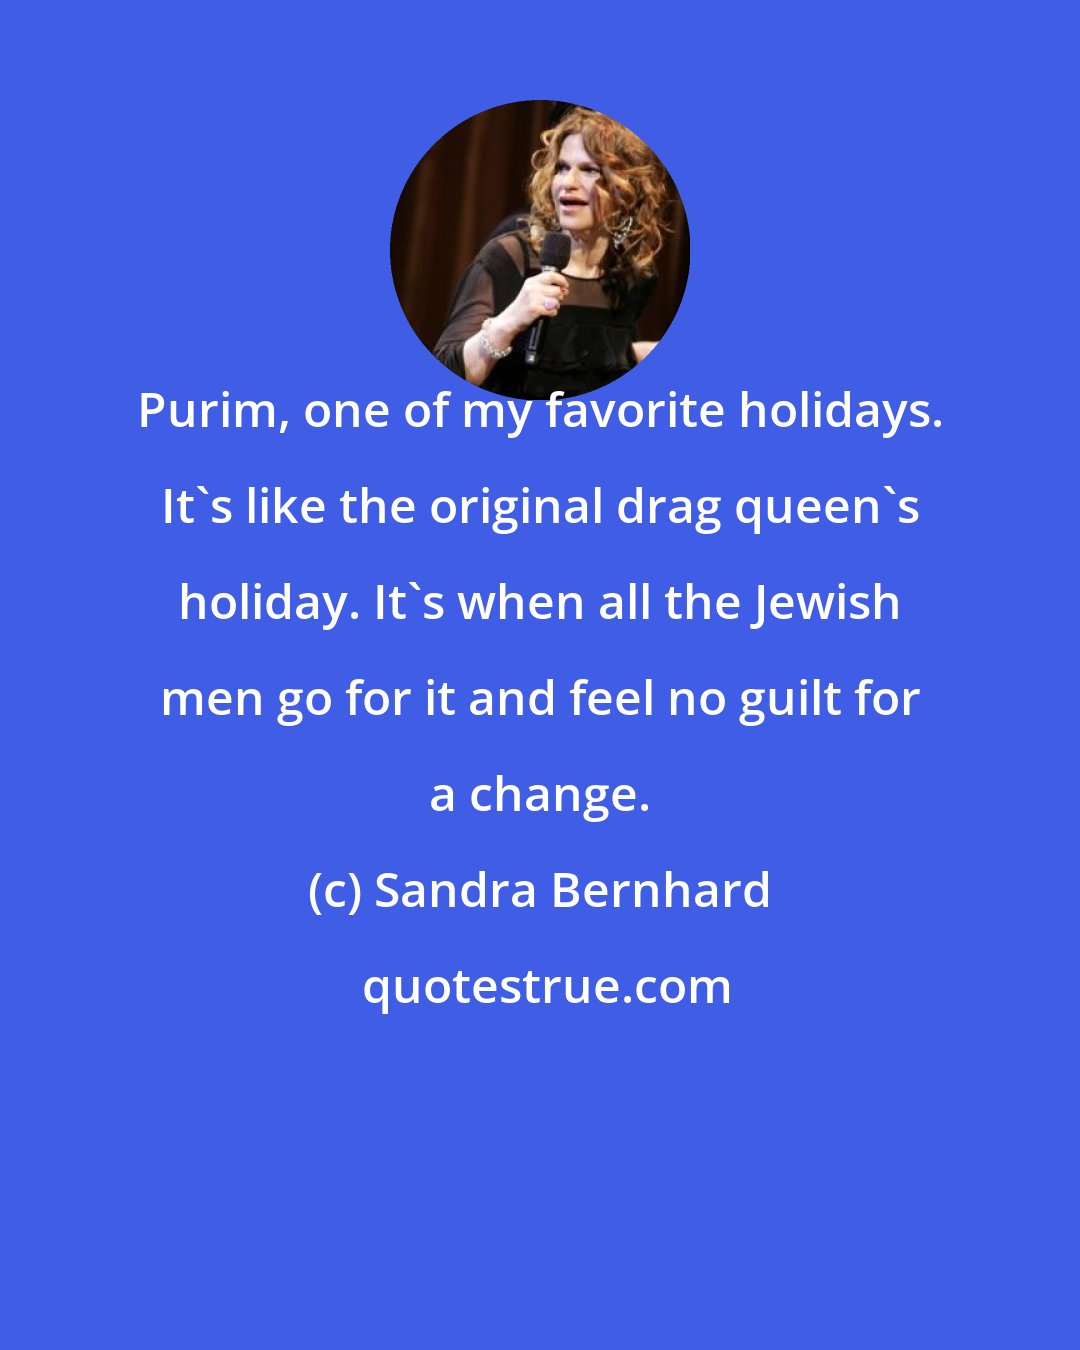 Sandra Bernhard: Purim, one of my favorite holidays. It's like the original drag queen's holiday. It's when all the Jewish men go for it and feel no guilt for a change.